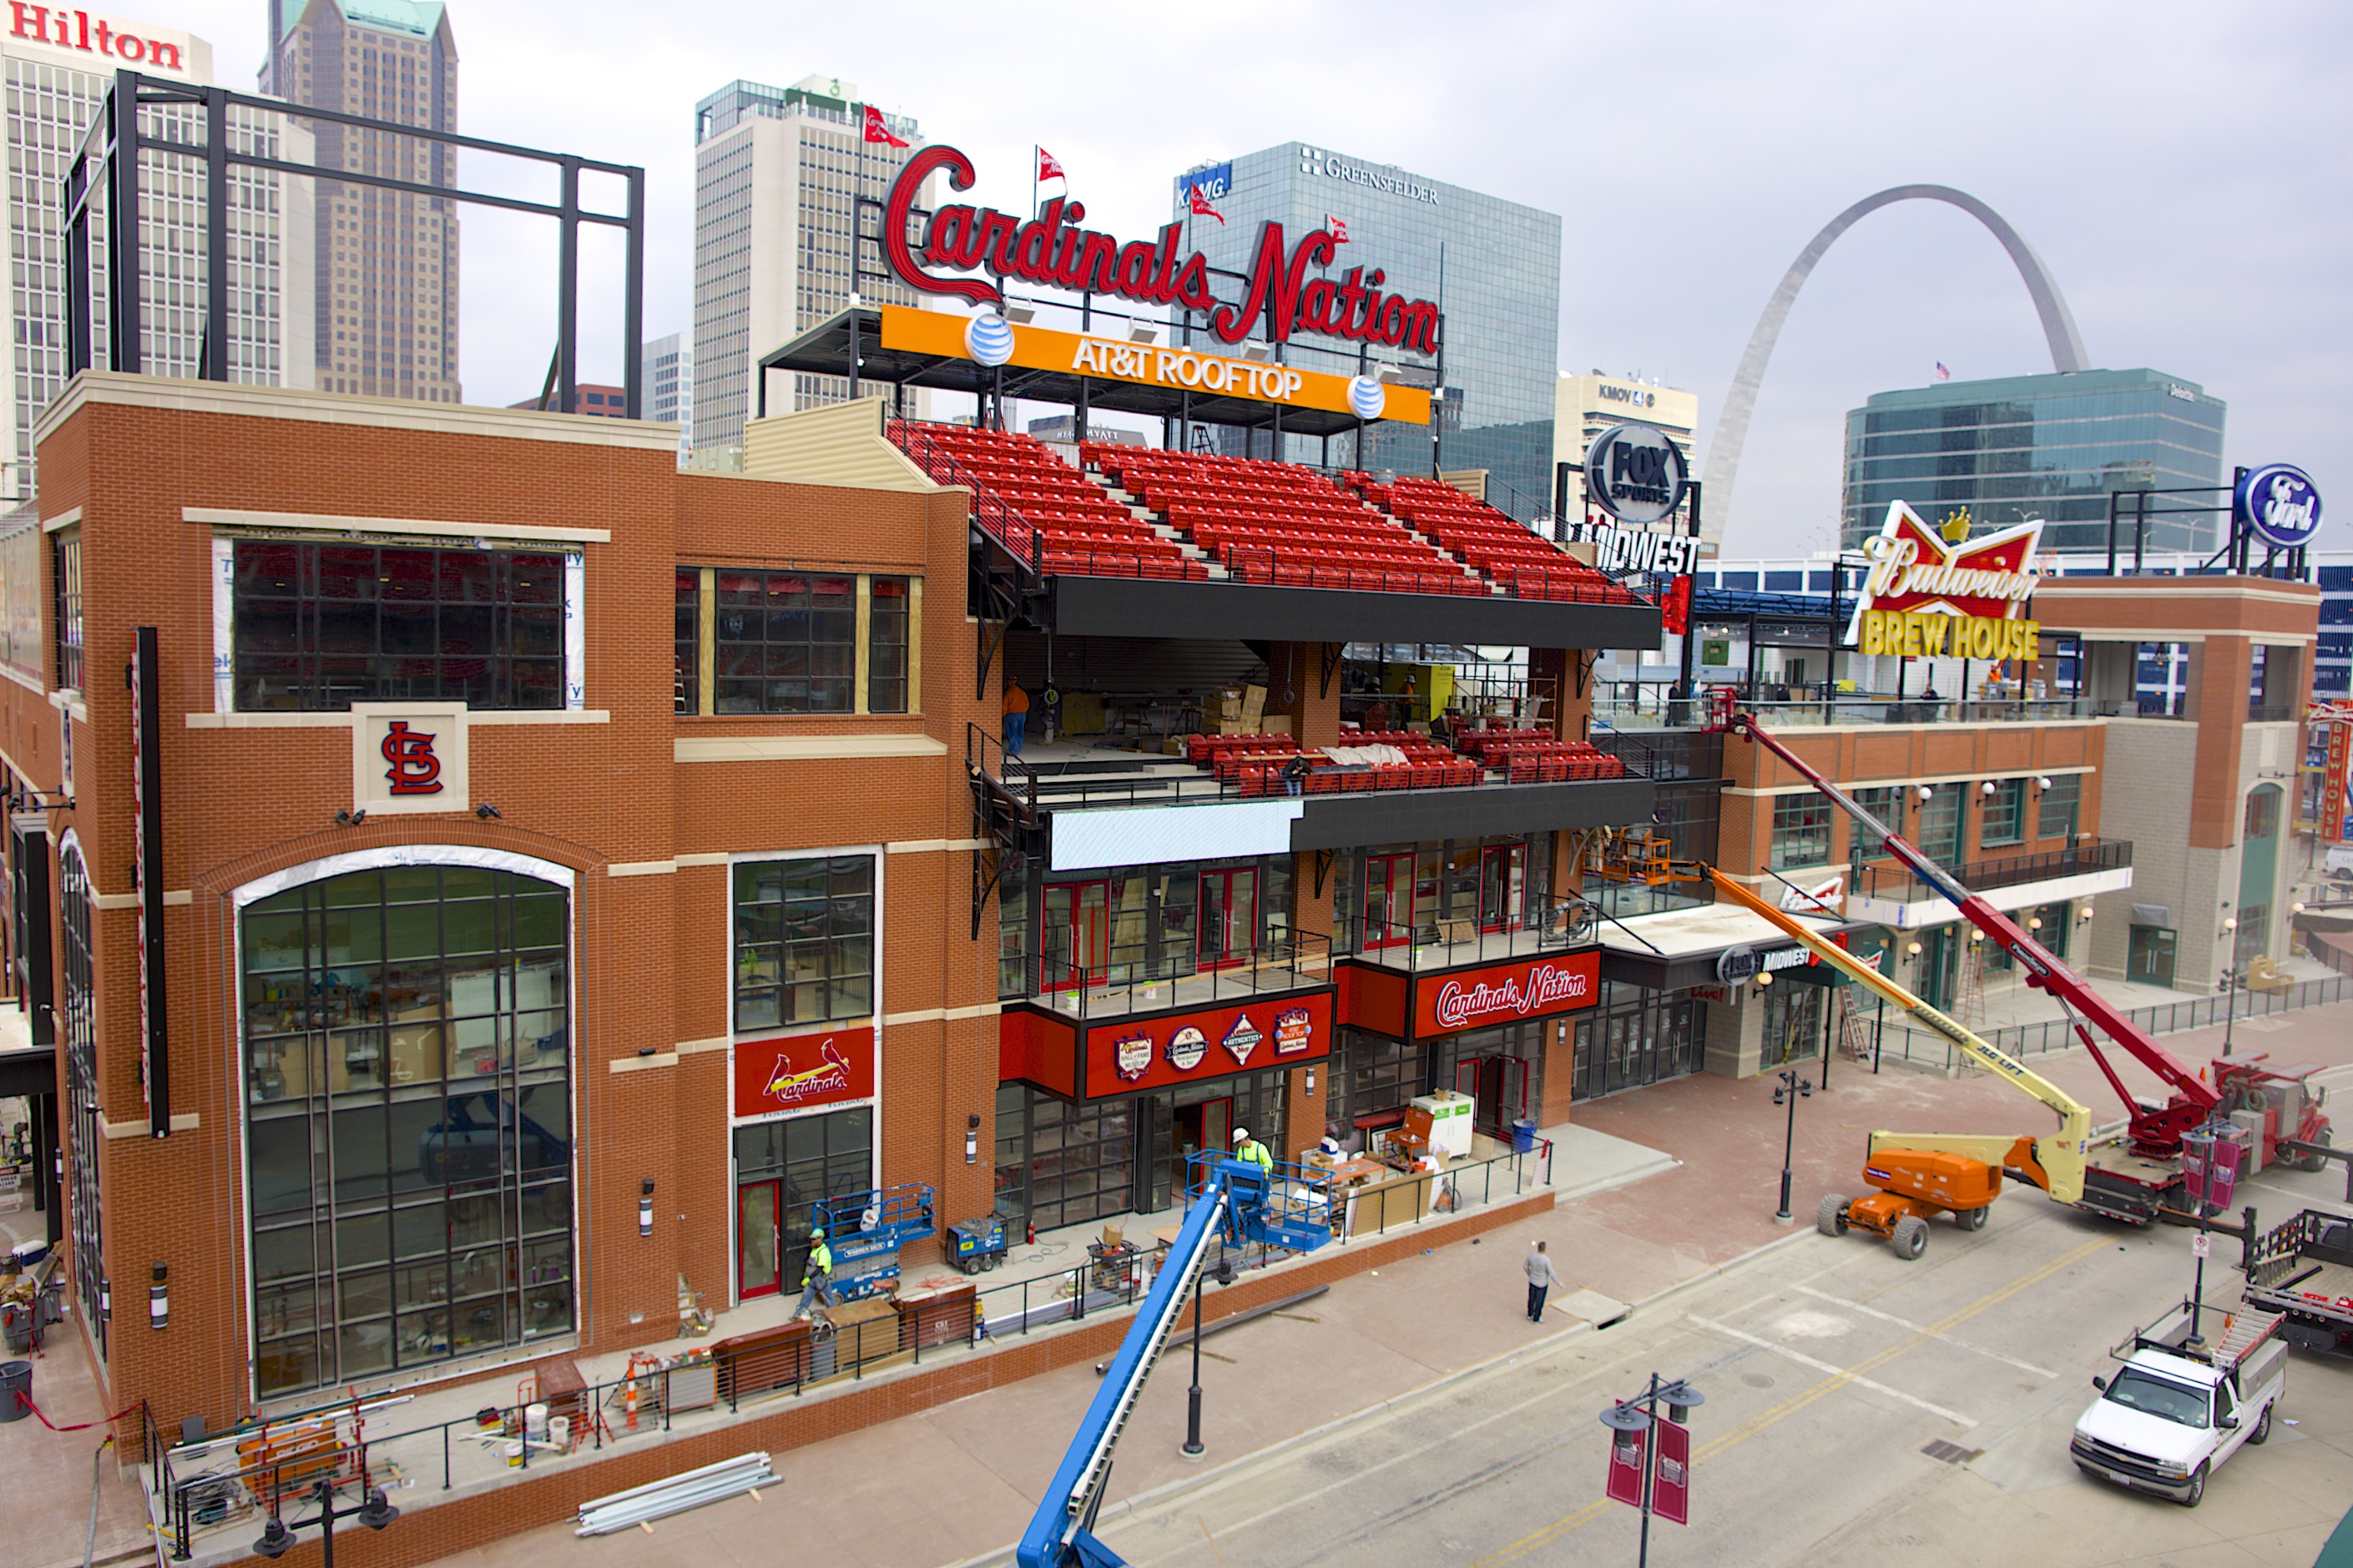 Long Awaited Ballpark Village Opens On Thursday: Will It Be A Hit On Non-Game Days? | St. Louis ...